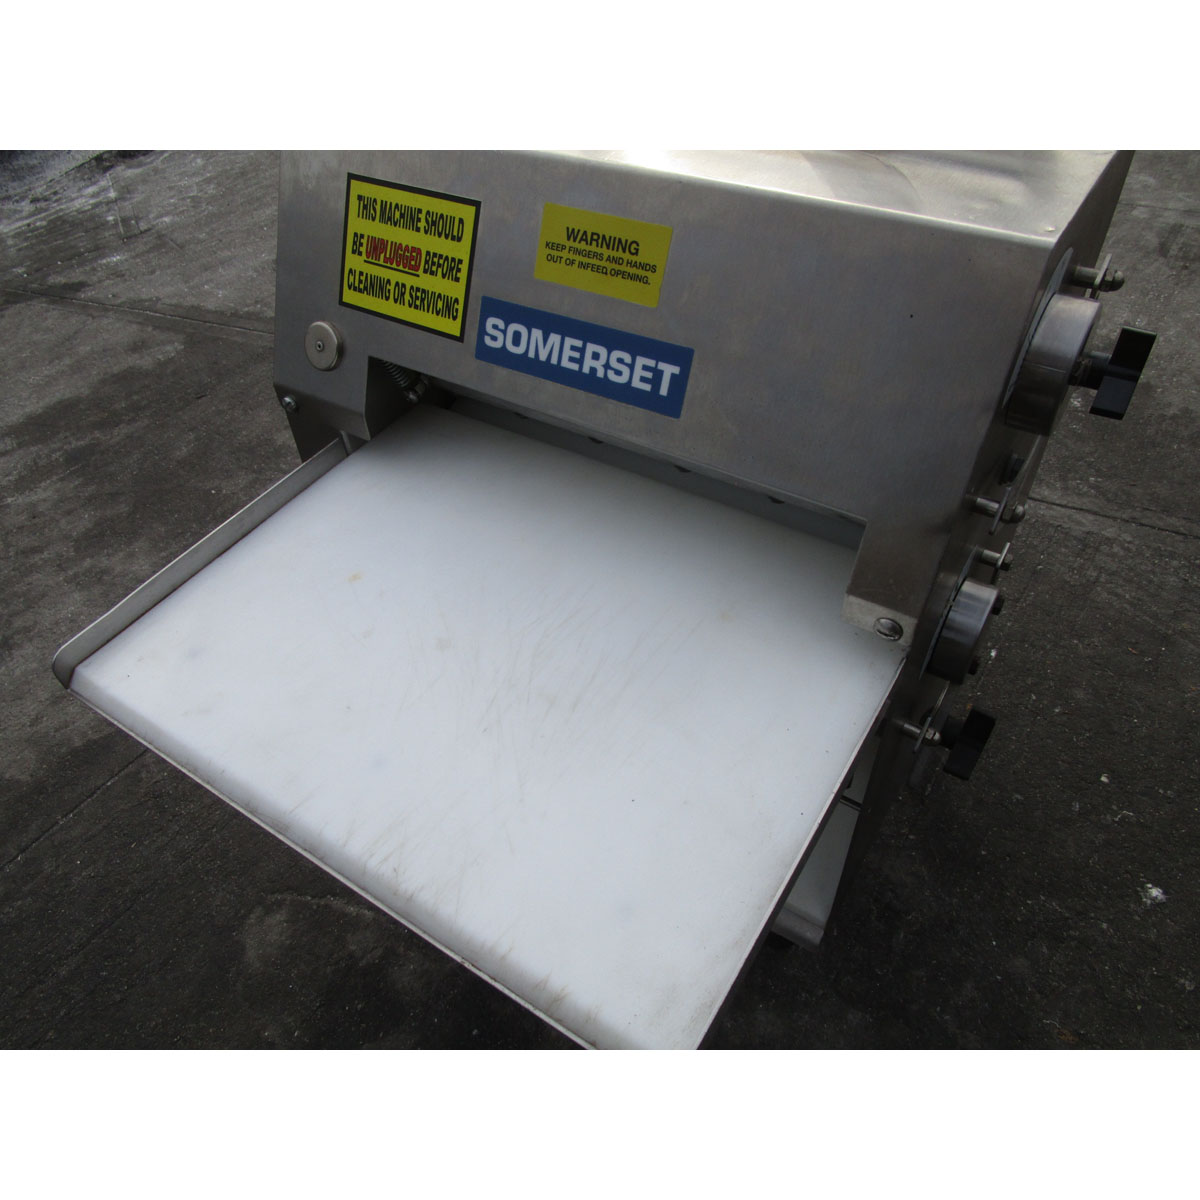 Somerset CDR-1550 Dough Sheeter/Roller, Used Working Condition image 4